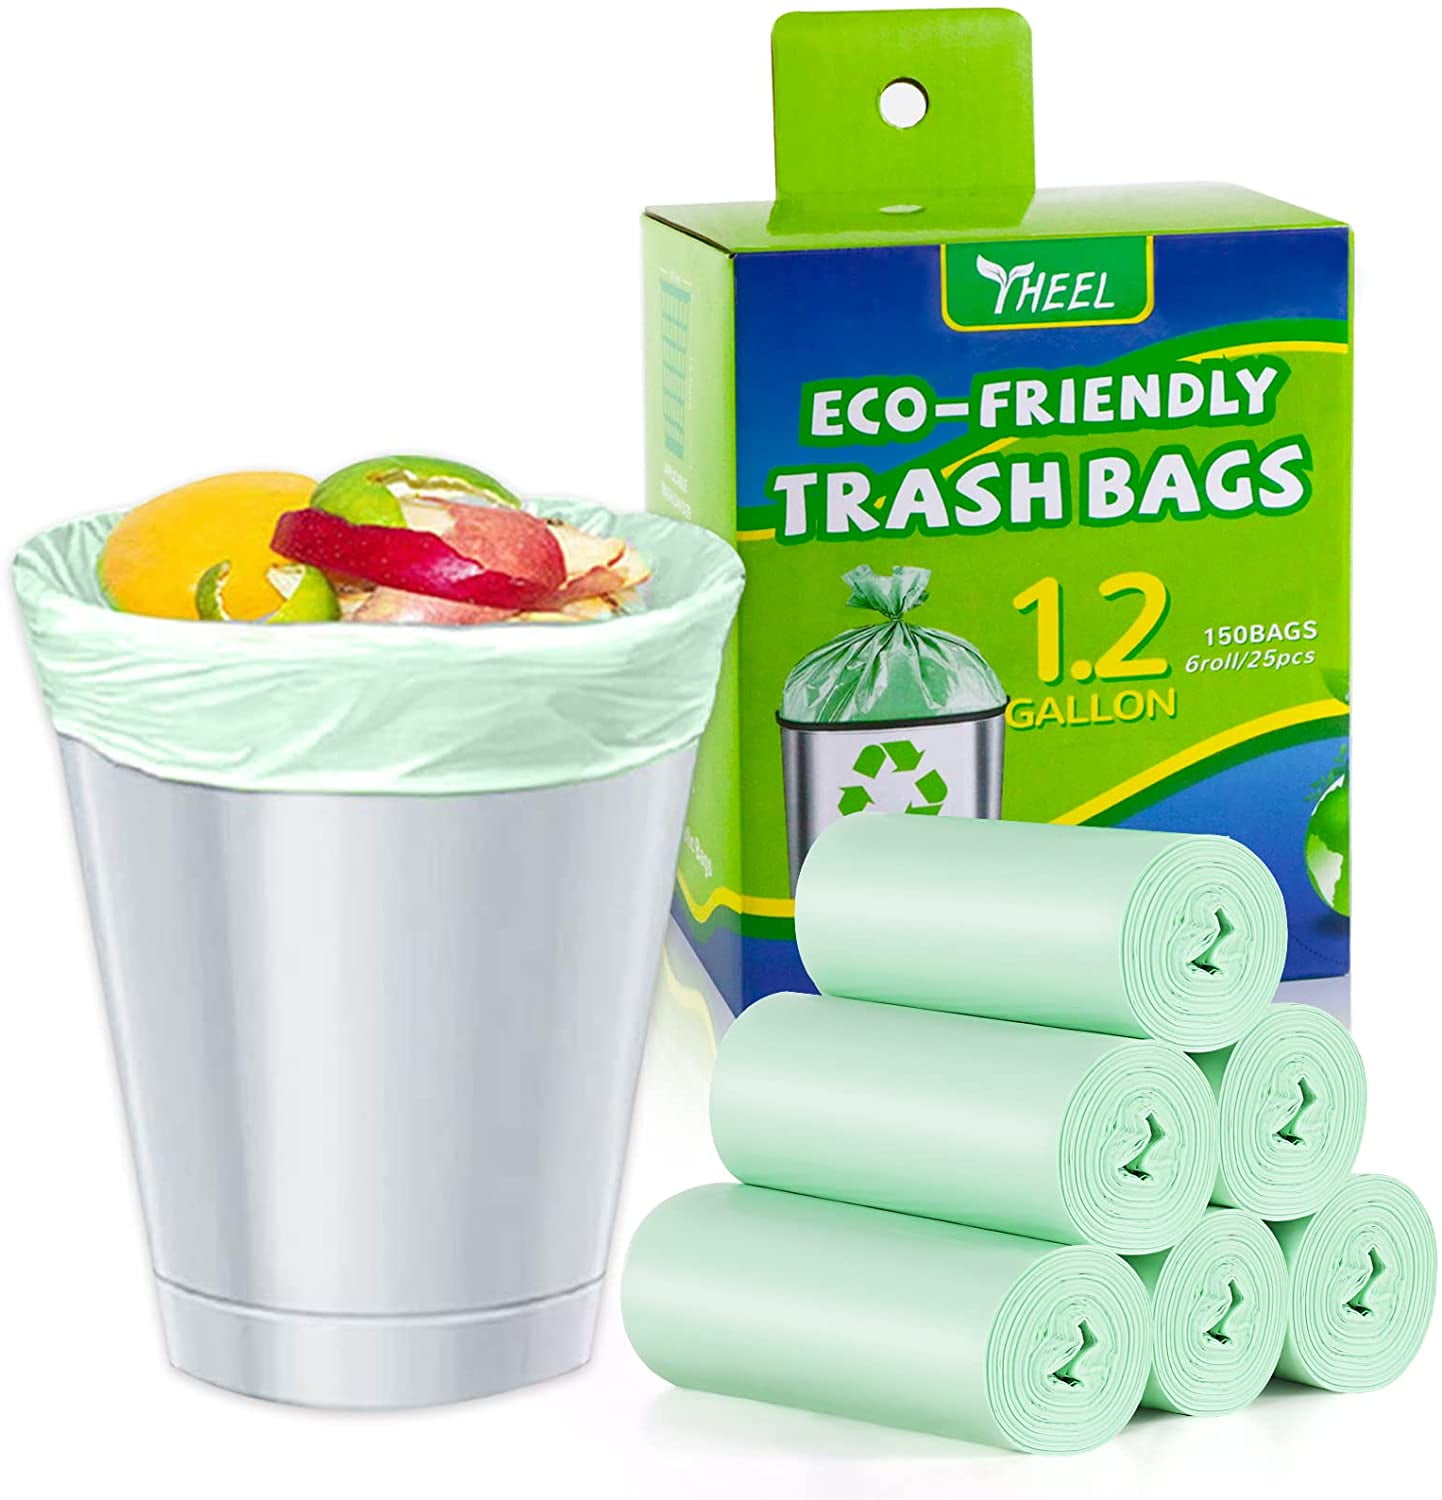 1.2 Gallon Small Trash bags Biodegradable Mini Bathroom Garbage Bags Fit  4.5 Liter Trash-Can-Liners for Bathroom Kitchen Office (150 Counts,Green)  150 Count (Pack of 1) 1.2 Gallon-Green 